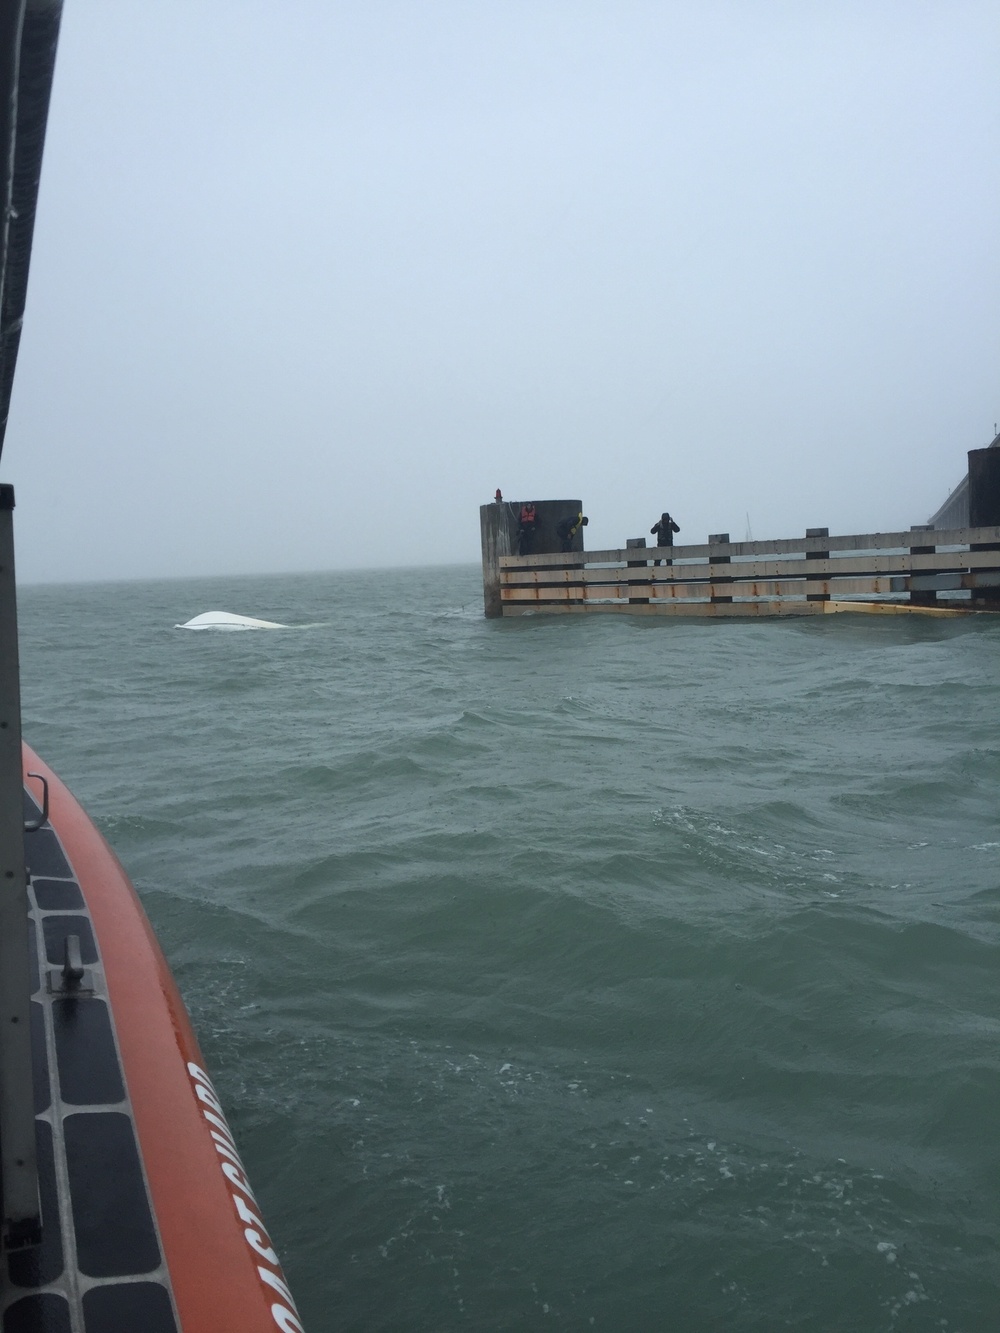 Coast Guard rescues 3 from capsized boat near South Padre Island, Texas